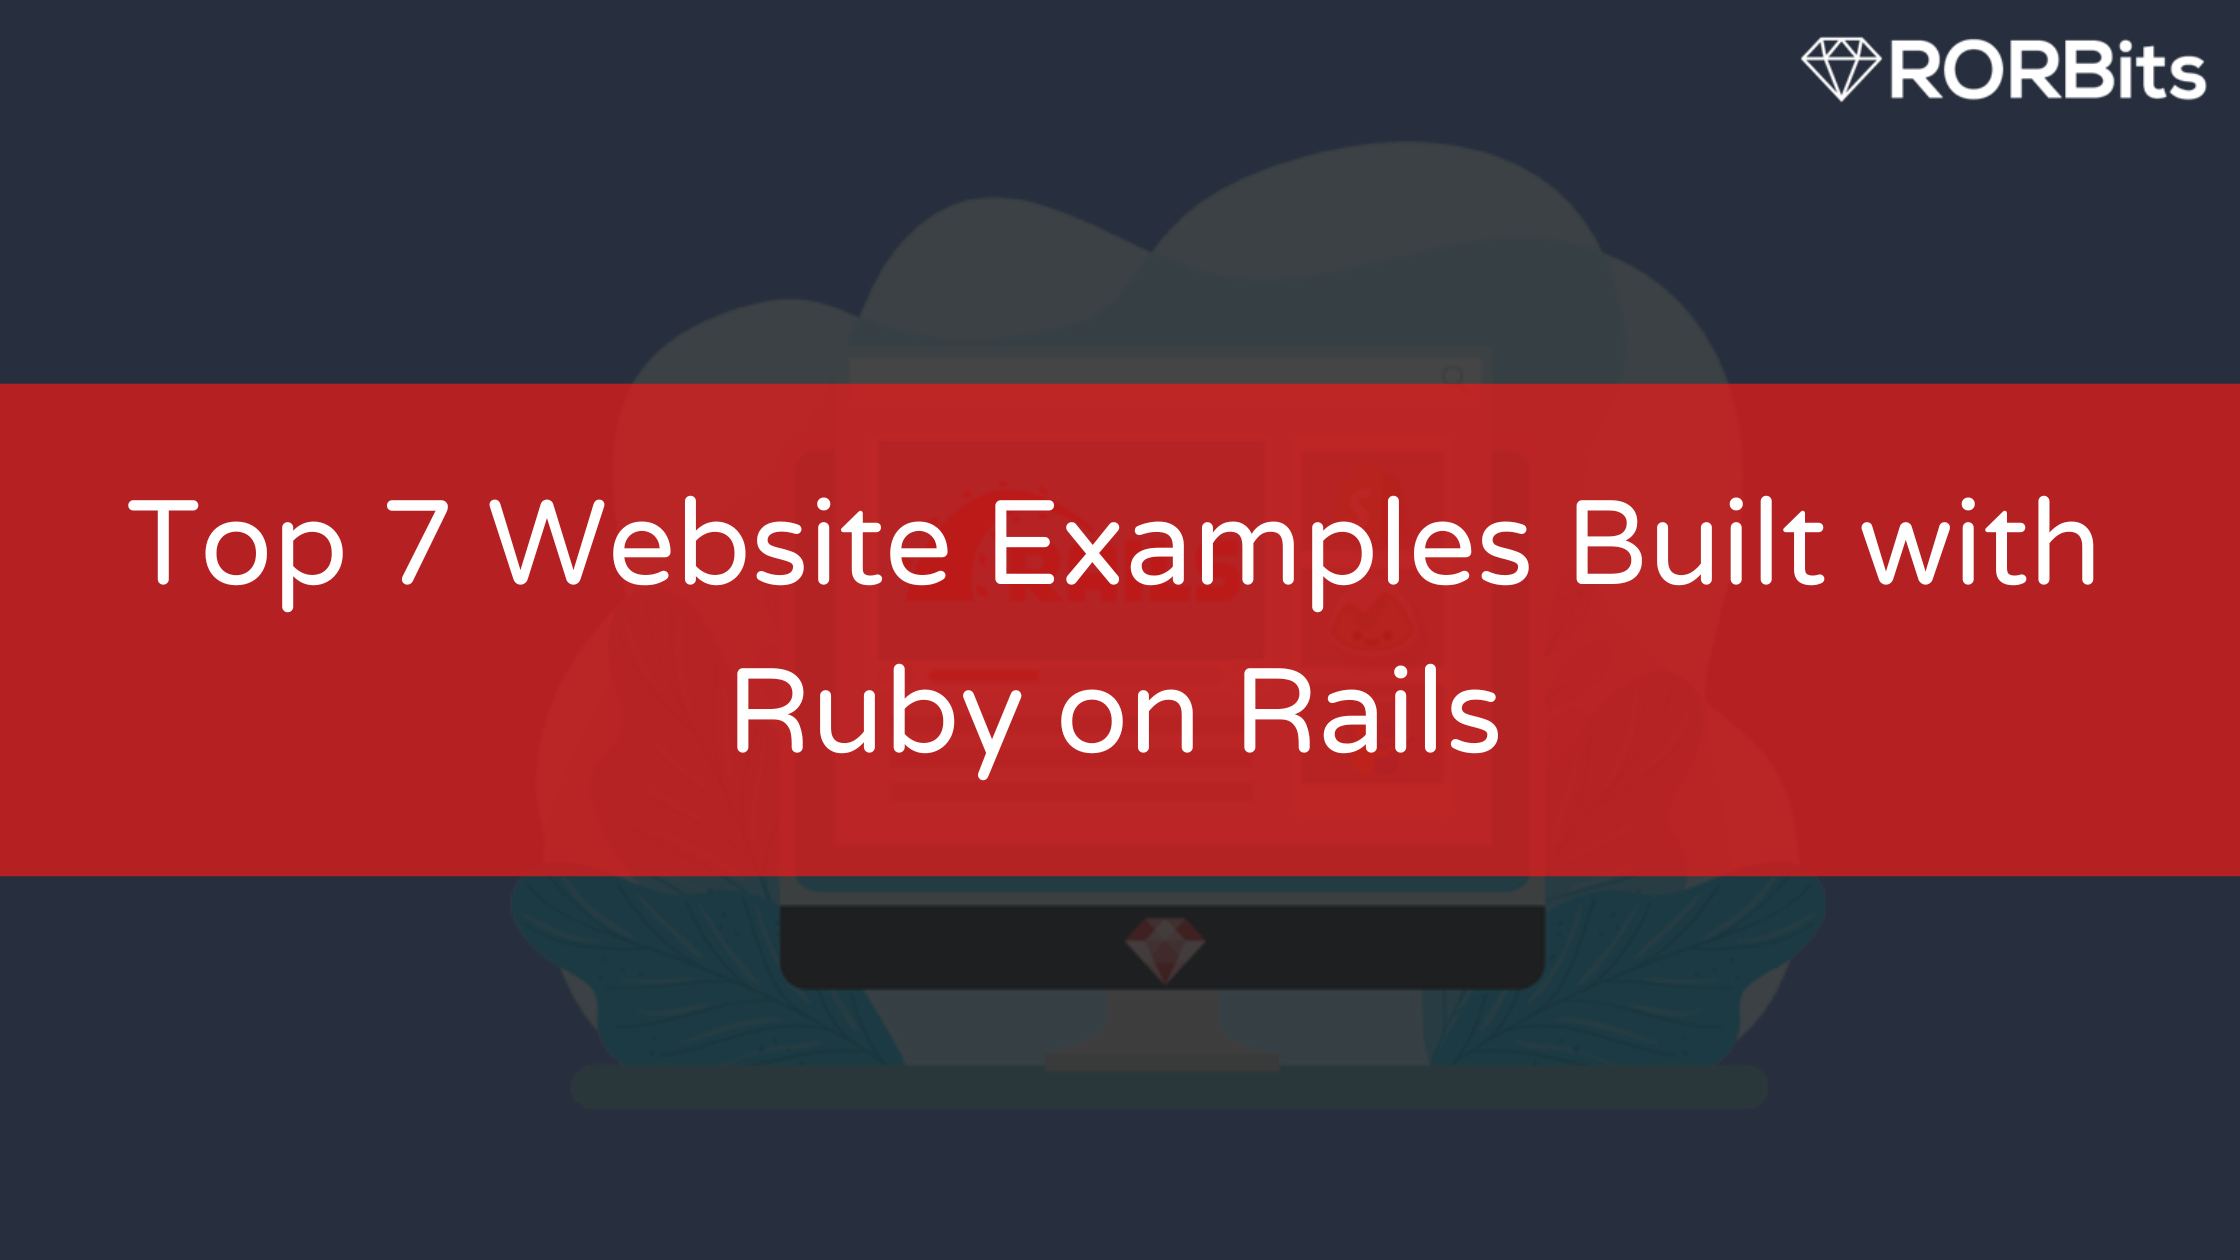 Top 7 Website Examples Built with Ruby on Rails